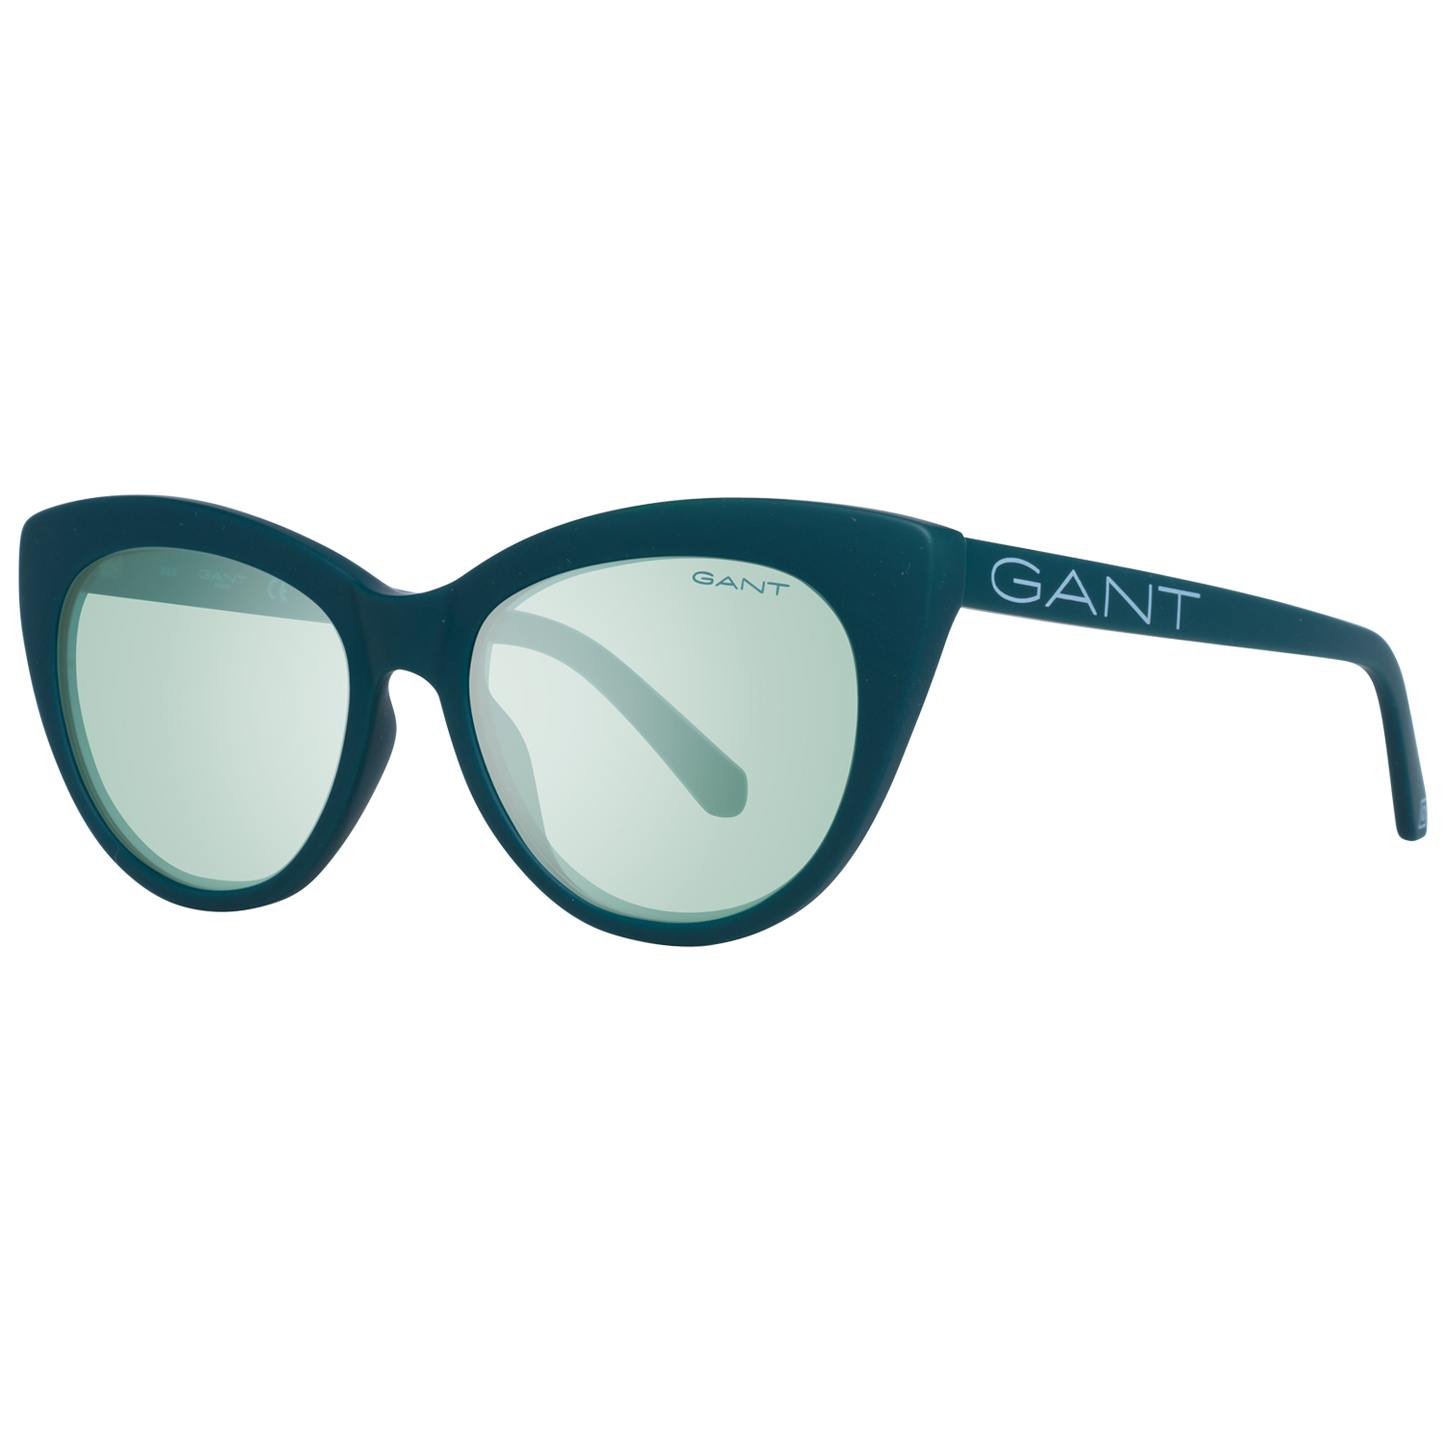 Green Sunglasses for Woman